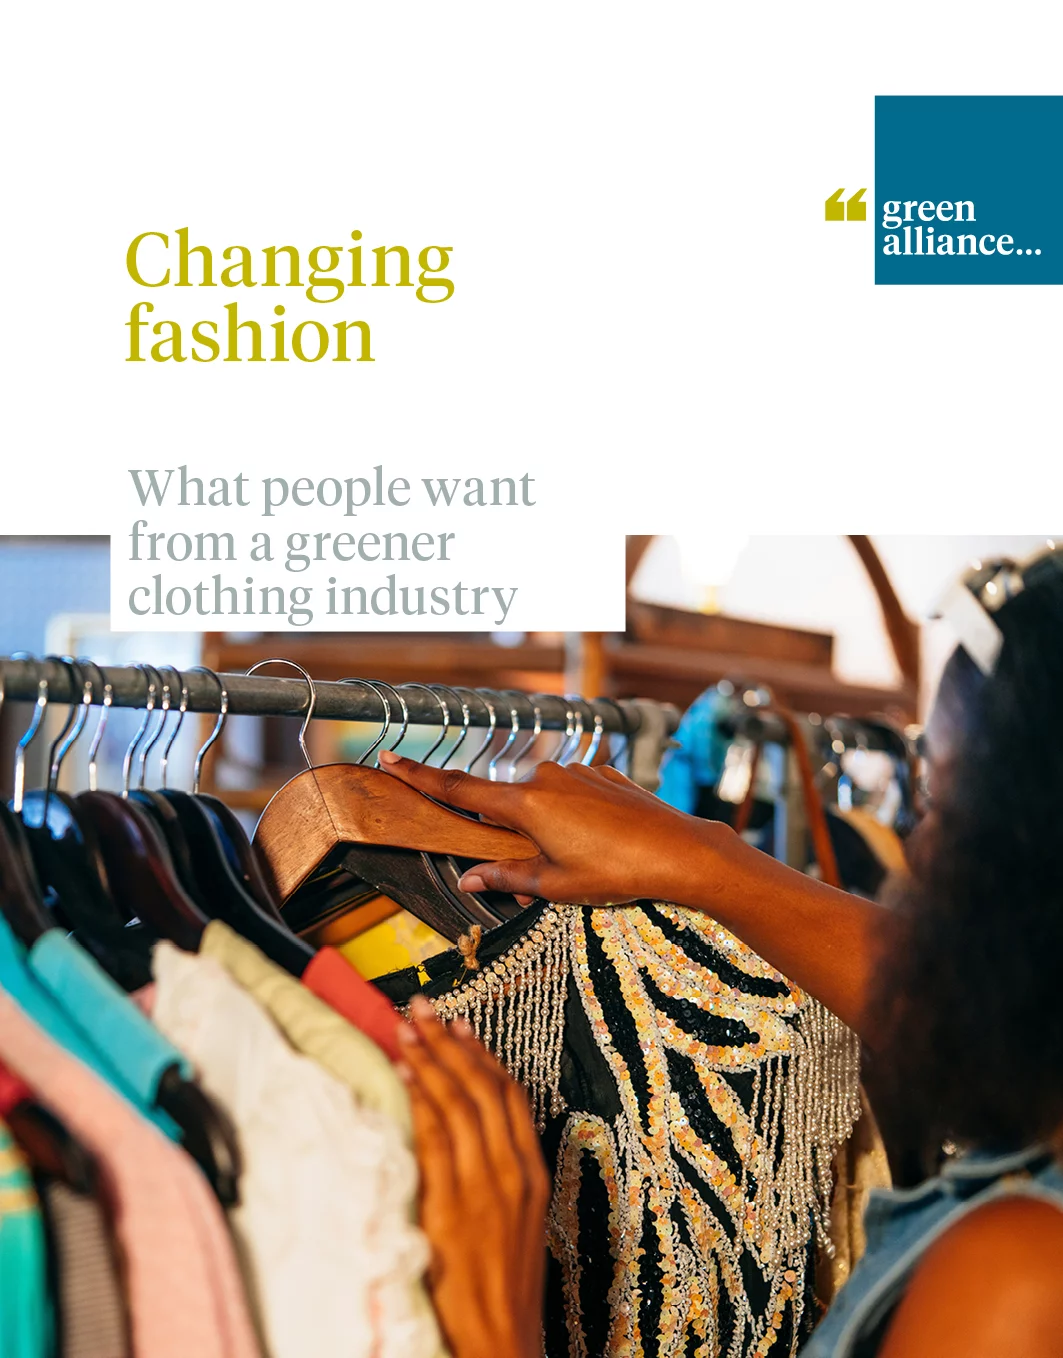 what people want from a greener clothing industry » Green Alliance